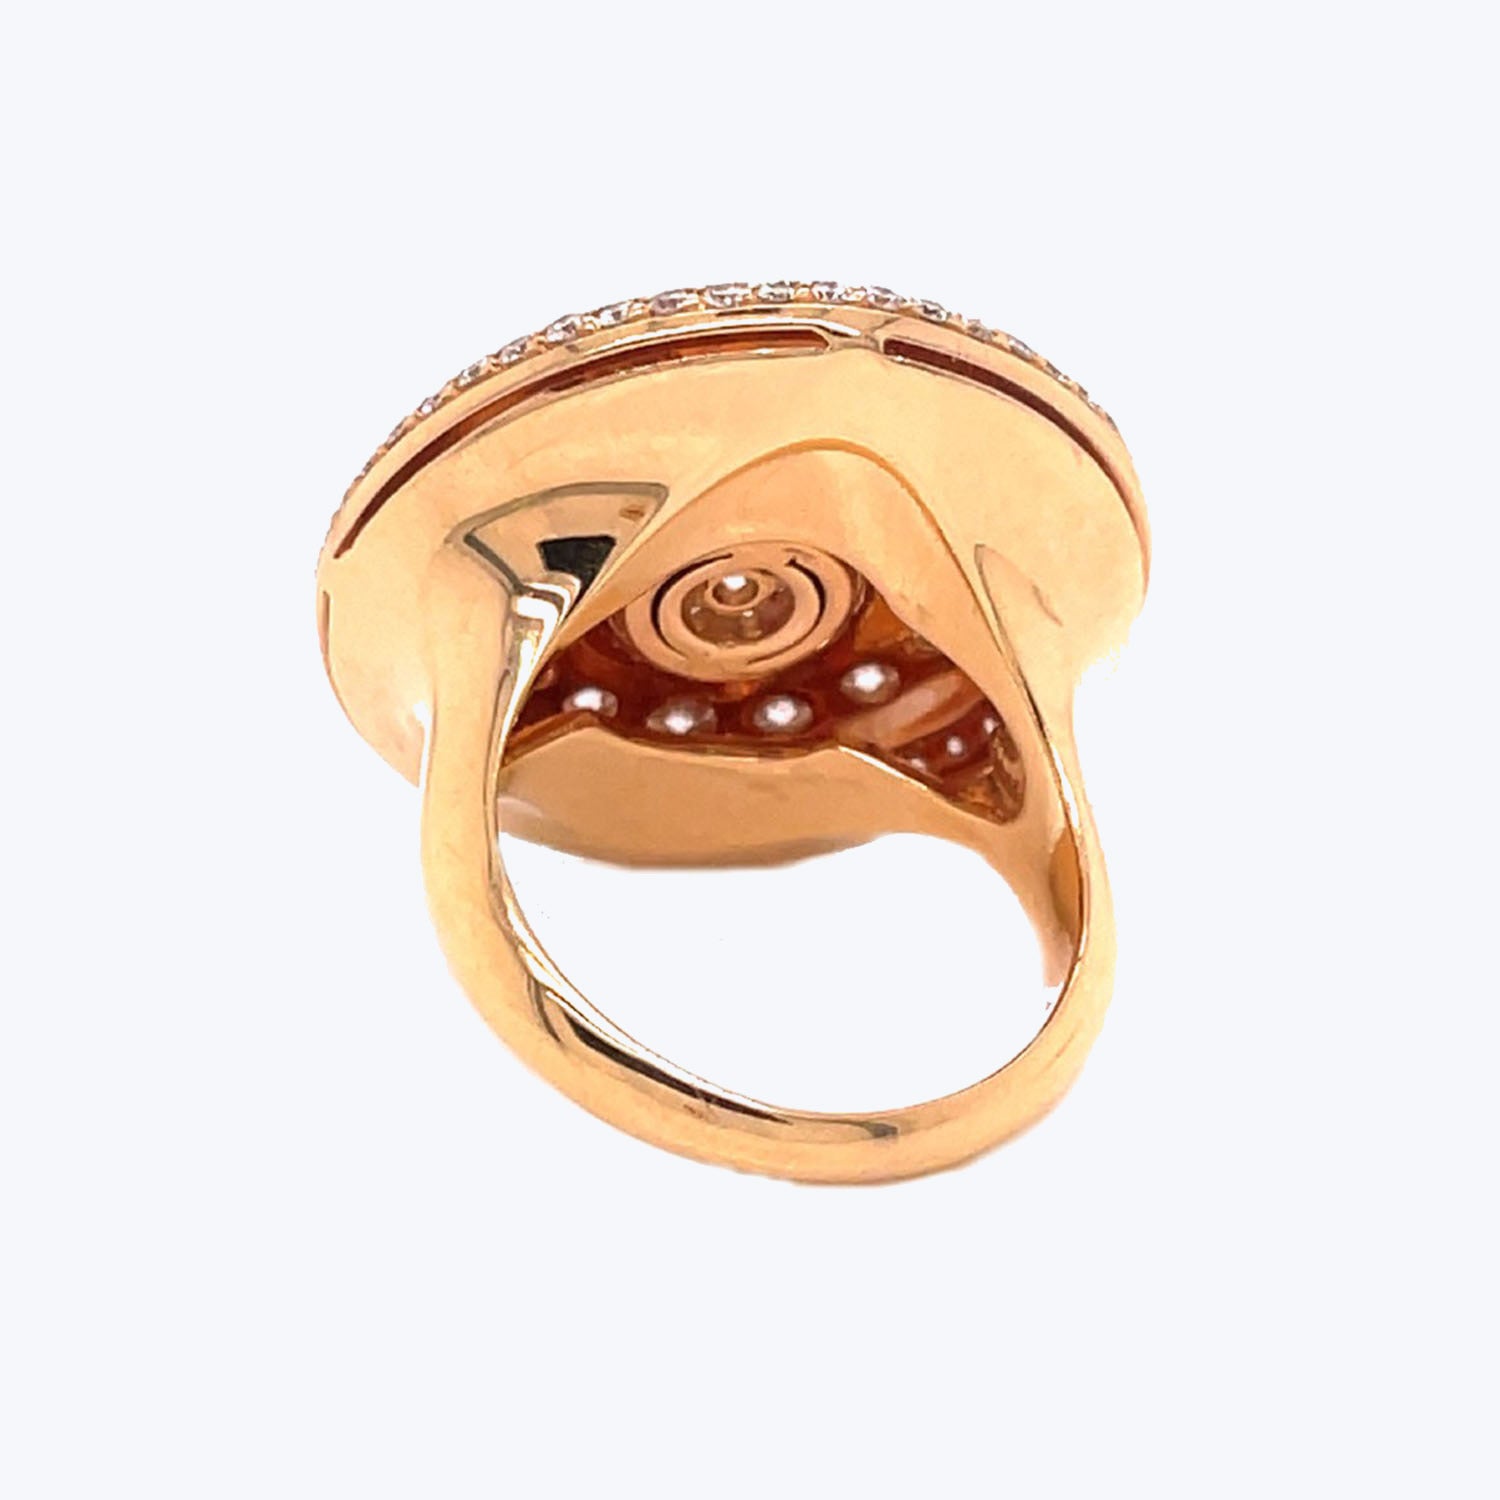 Elegant gold-toned ring with intricate swirling design and crystal embellishments.